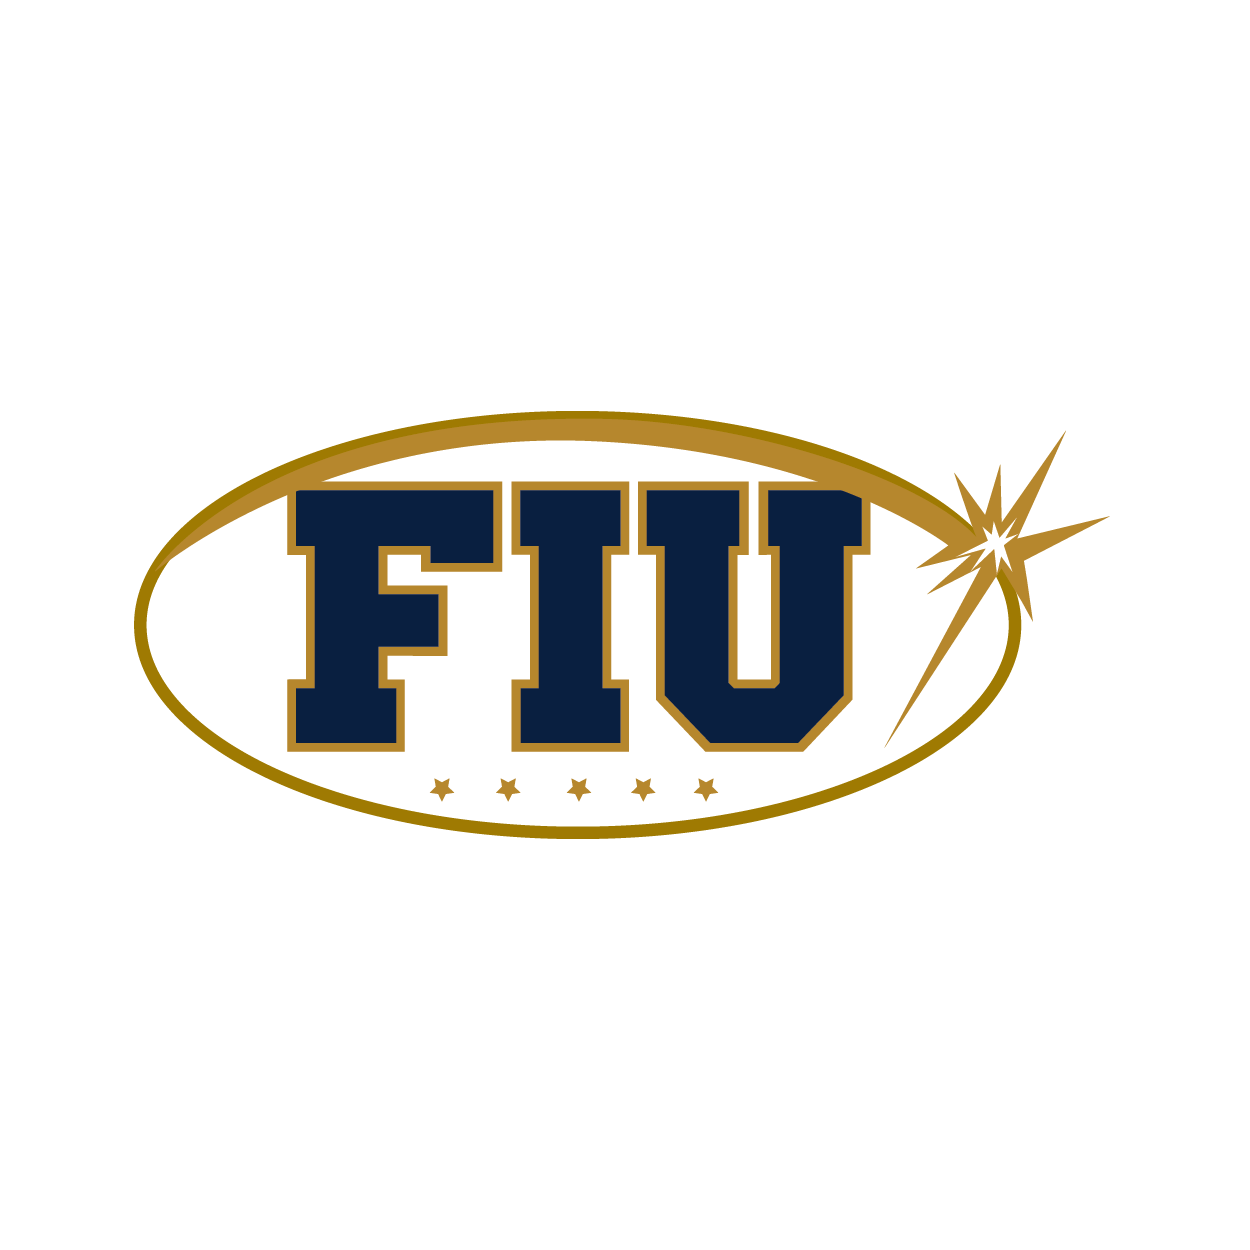 2016 had 2 pins, this pin is a white oval with fiu in navy blue in the center and with a gold spark over it and below the fiu are 5 gold stars